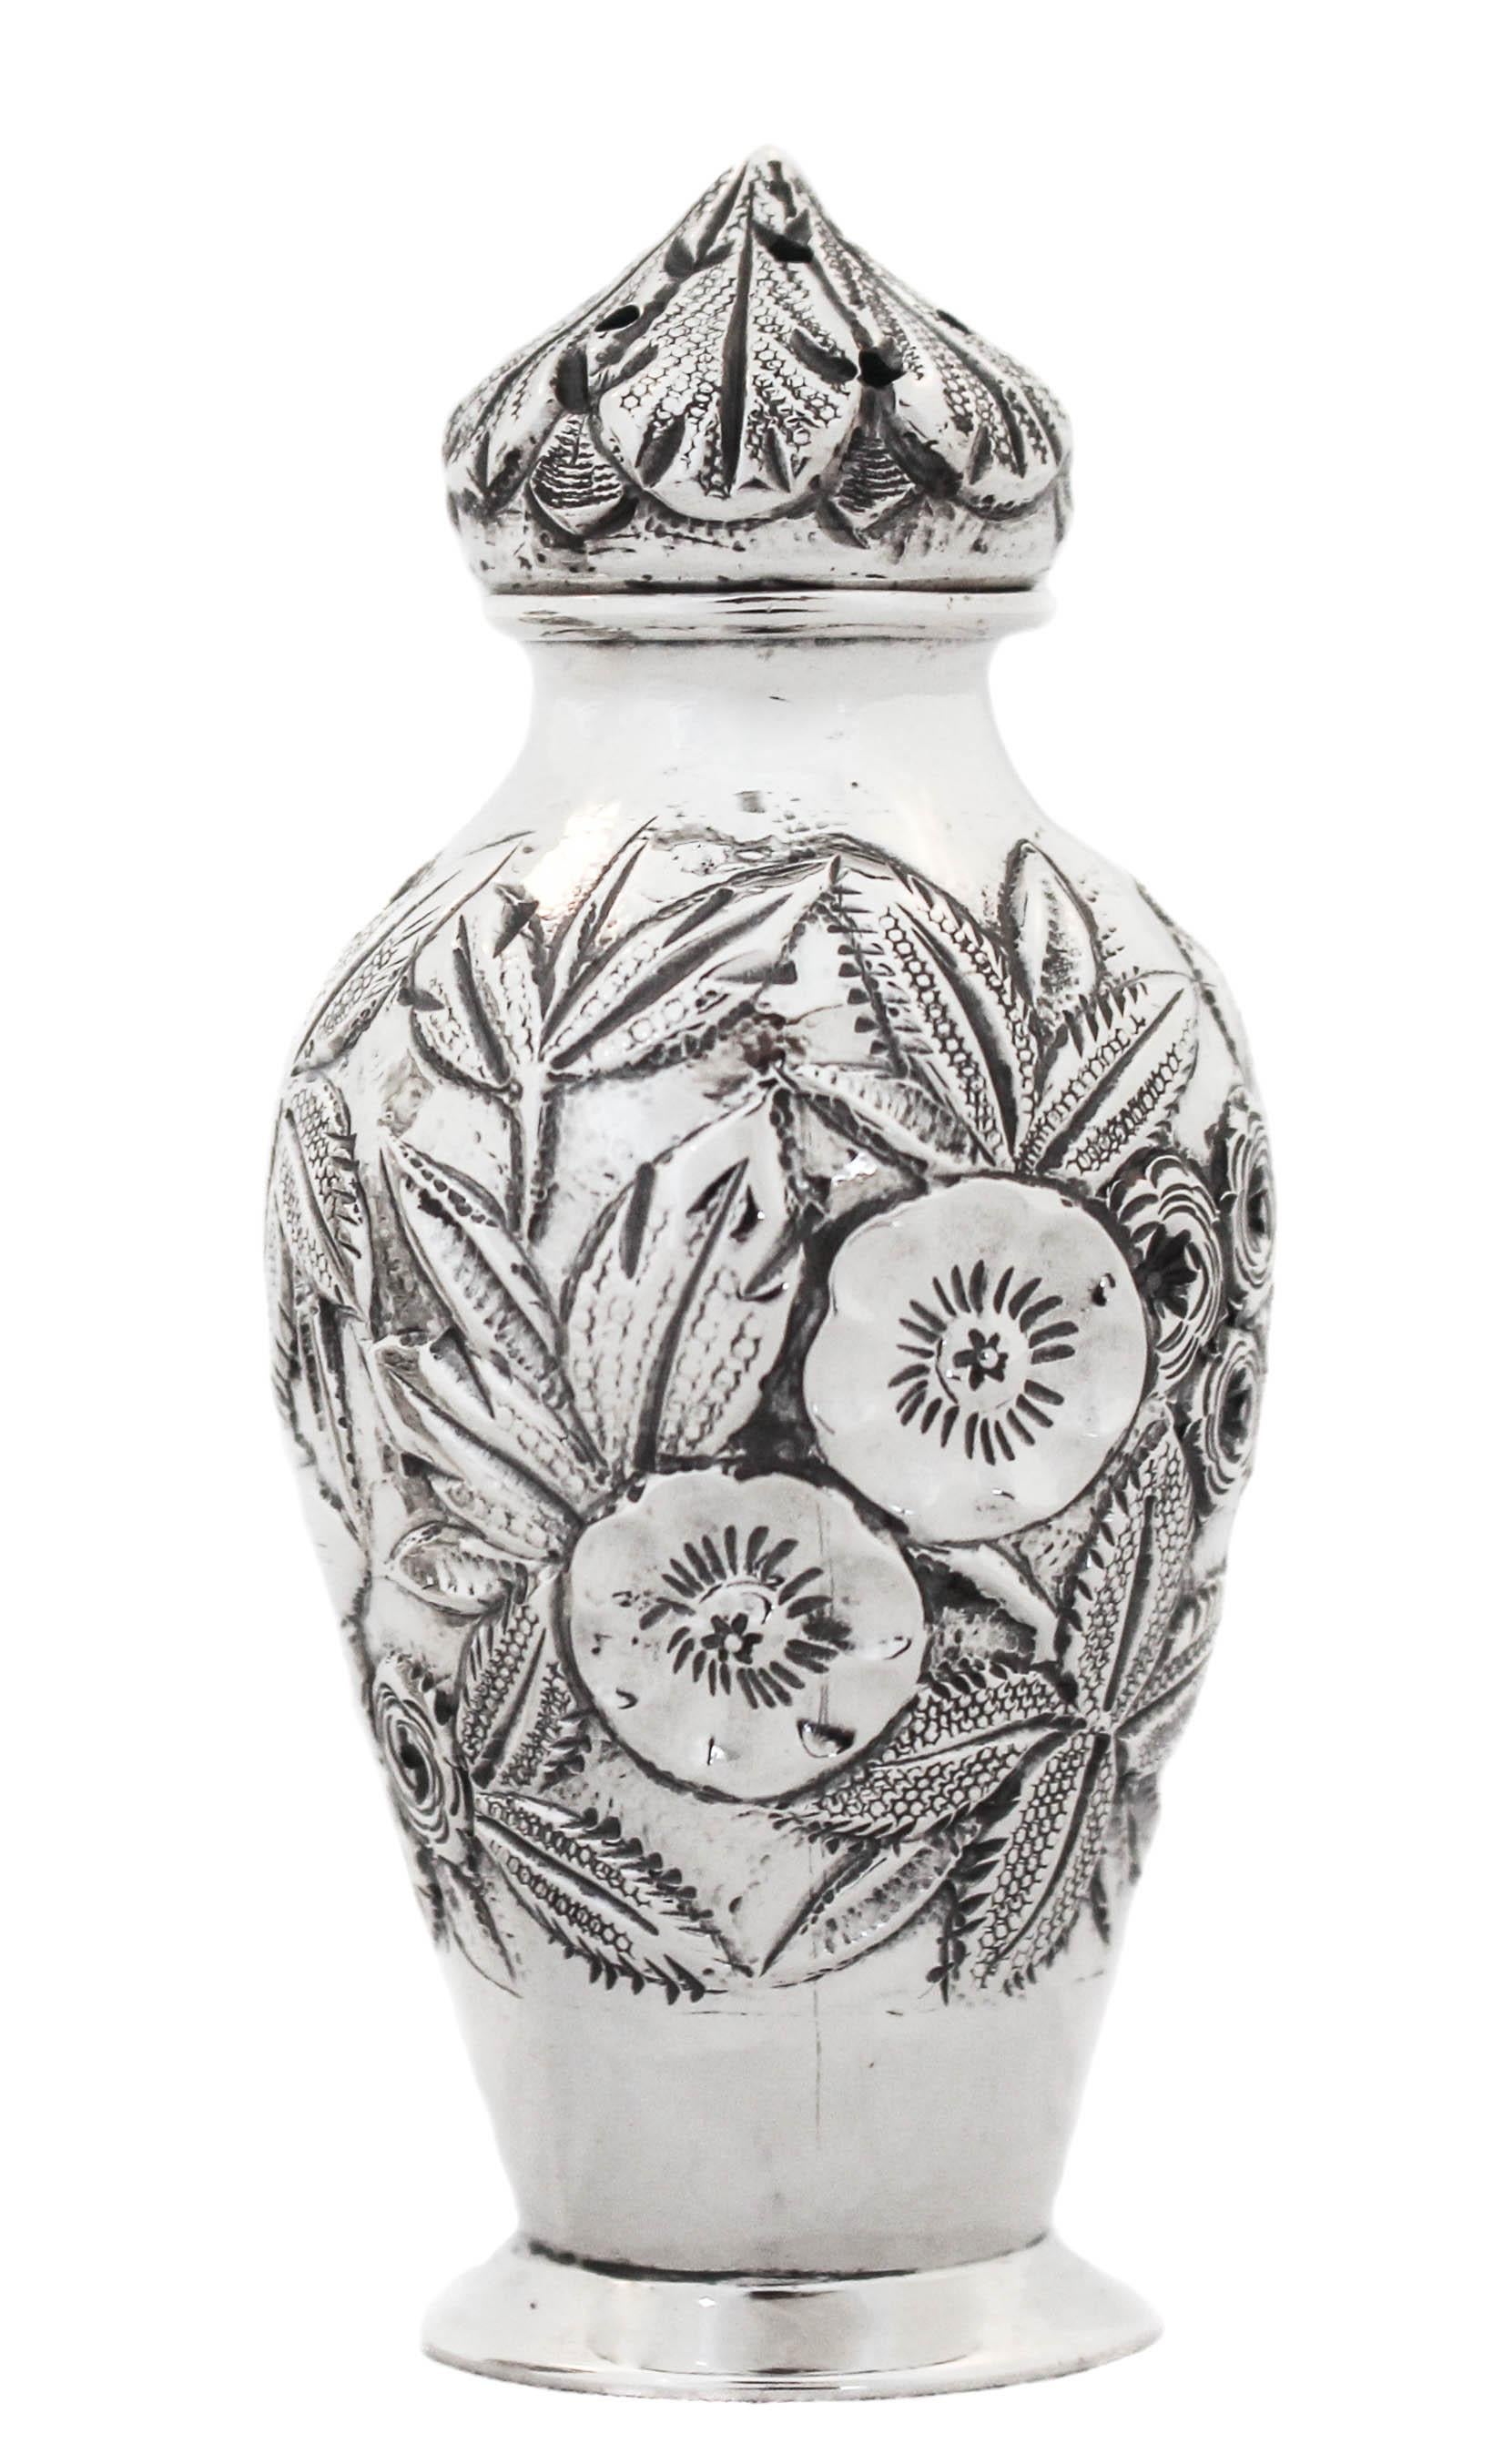 A pair of sterling silver salt shakers in the “Repousse” pattern by S. Kirk & Sons of Baltimore. “Repousse” is synonymous with S. Kirk & Sons; it is there most famous and celebrated pattern. Clusters of flowers and leaves cover the entire shaker and